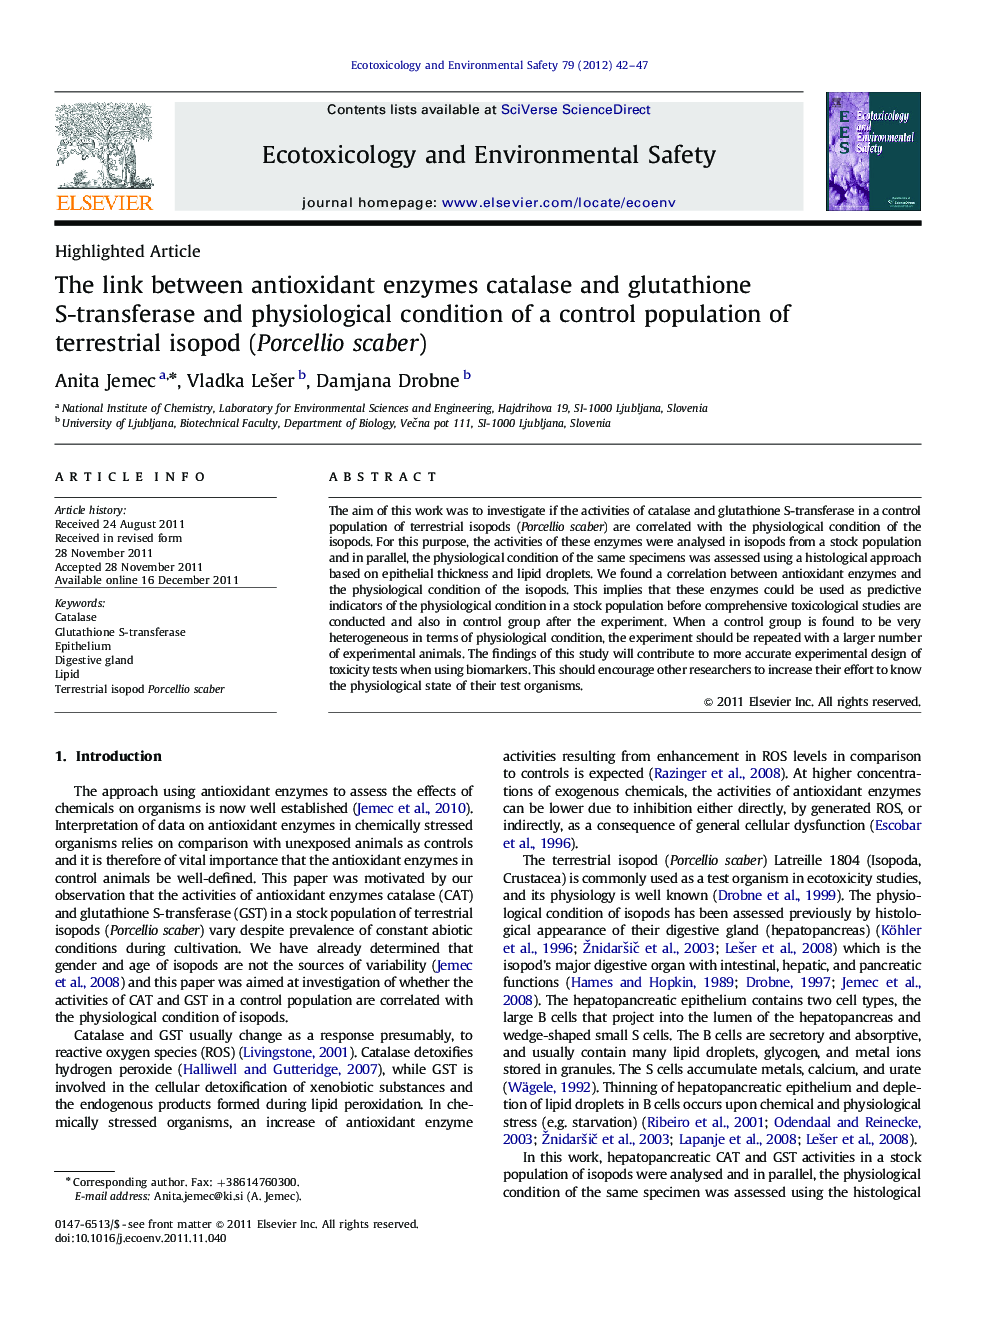 The link between antioxidant enzymes catalase and glutathione S-transferase and physiological condition of a control population of terrestrial isopod (Porcellio scaber)